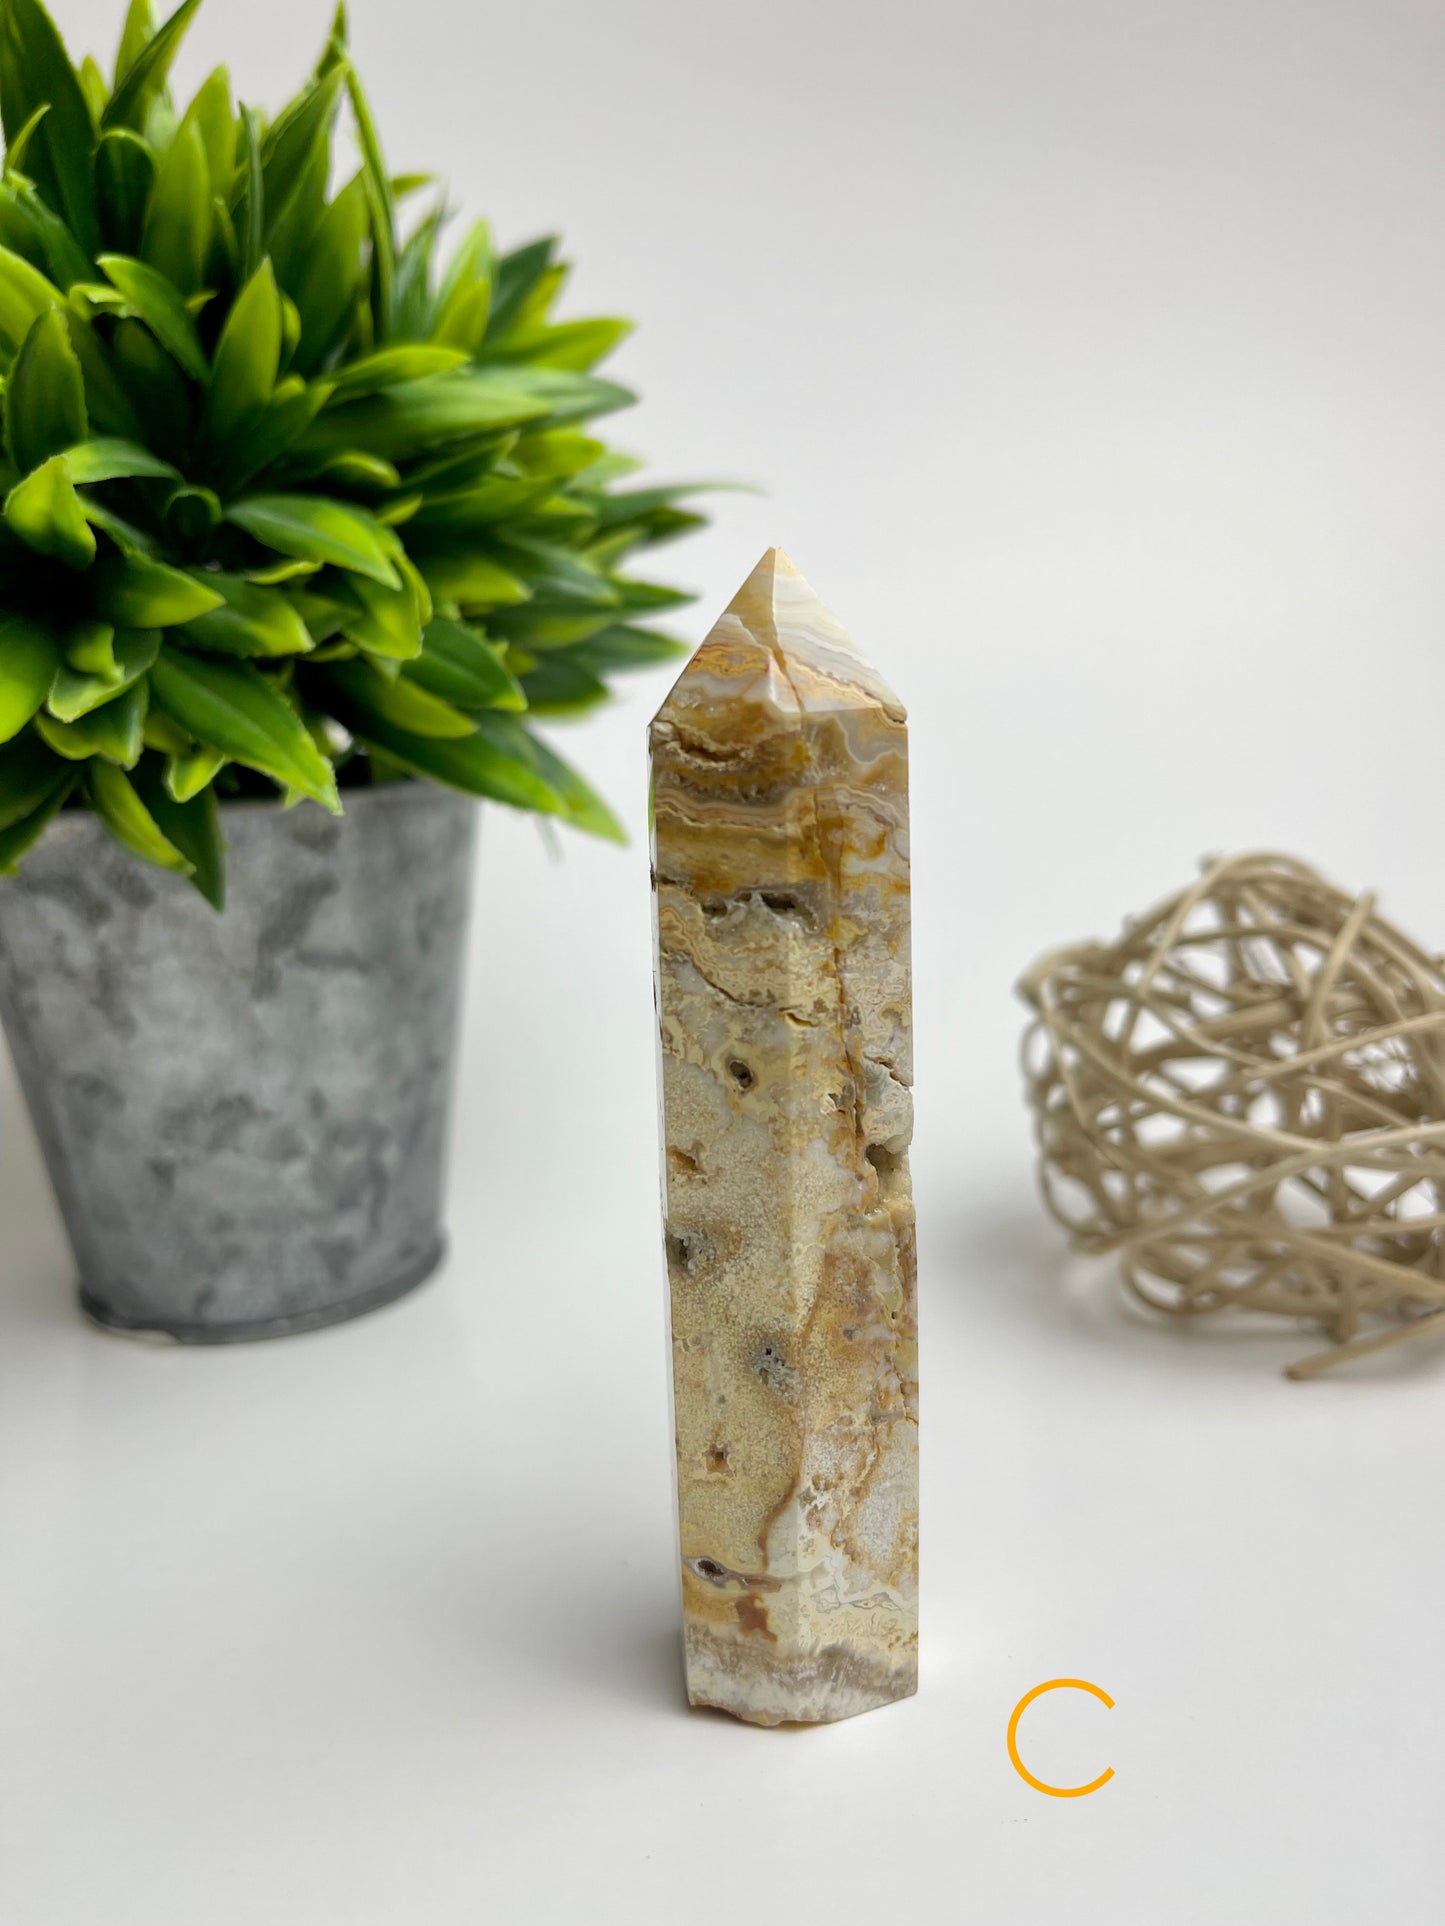 Crazy Lace Agate Towers